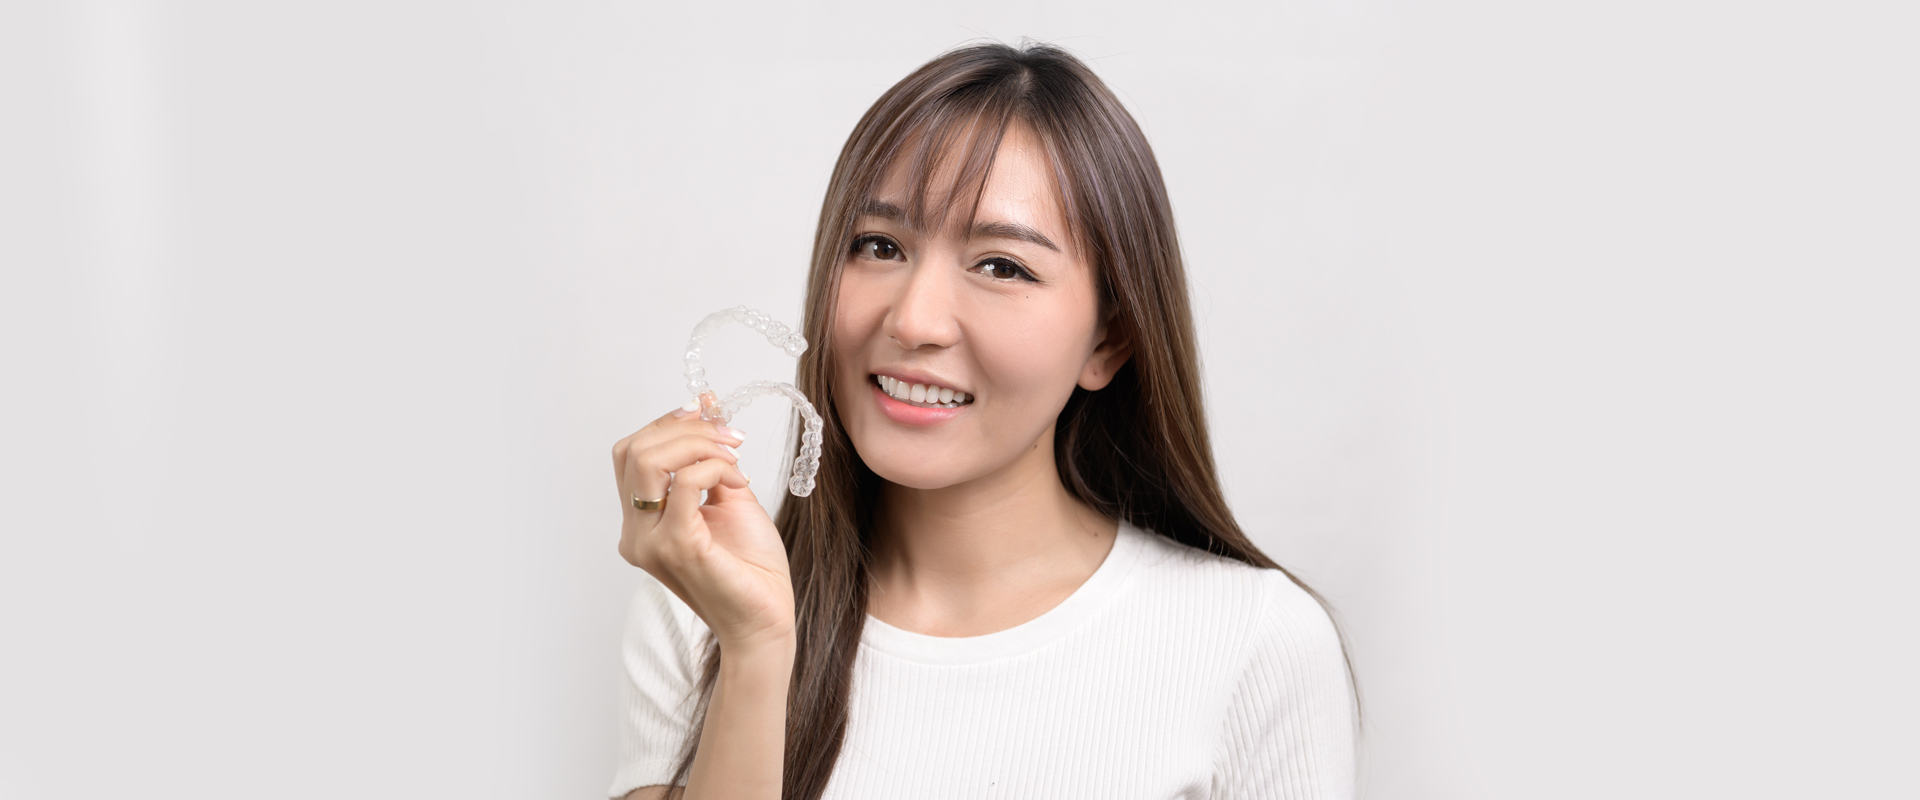 $1000 OFF BRACES & $500 CLEAR ALIGNERS!